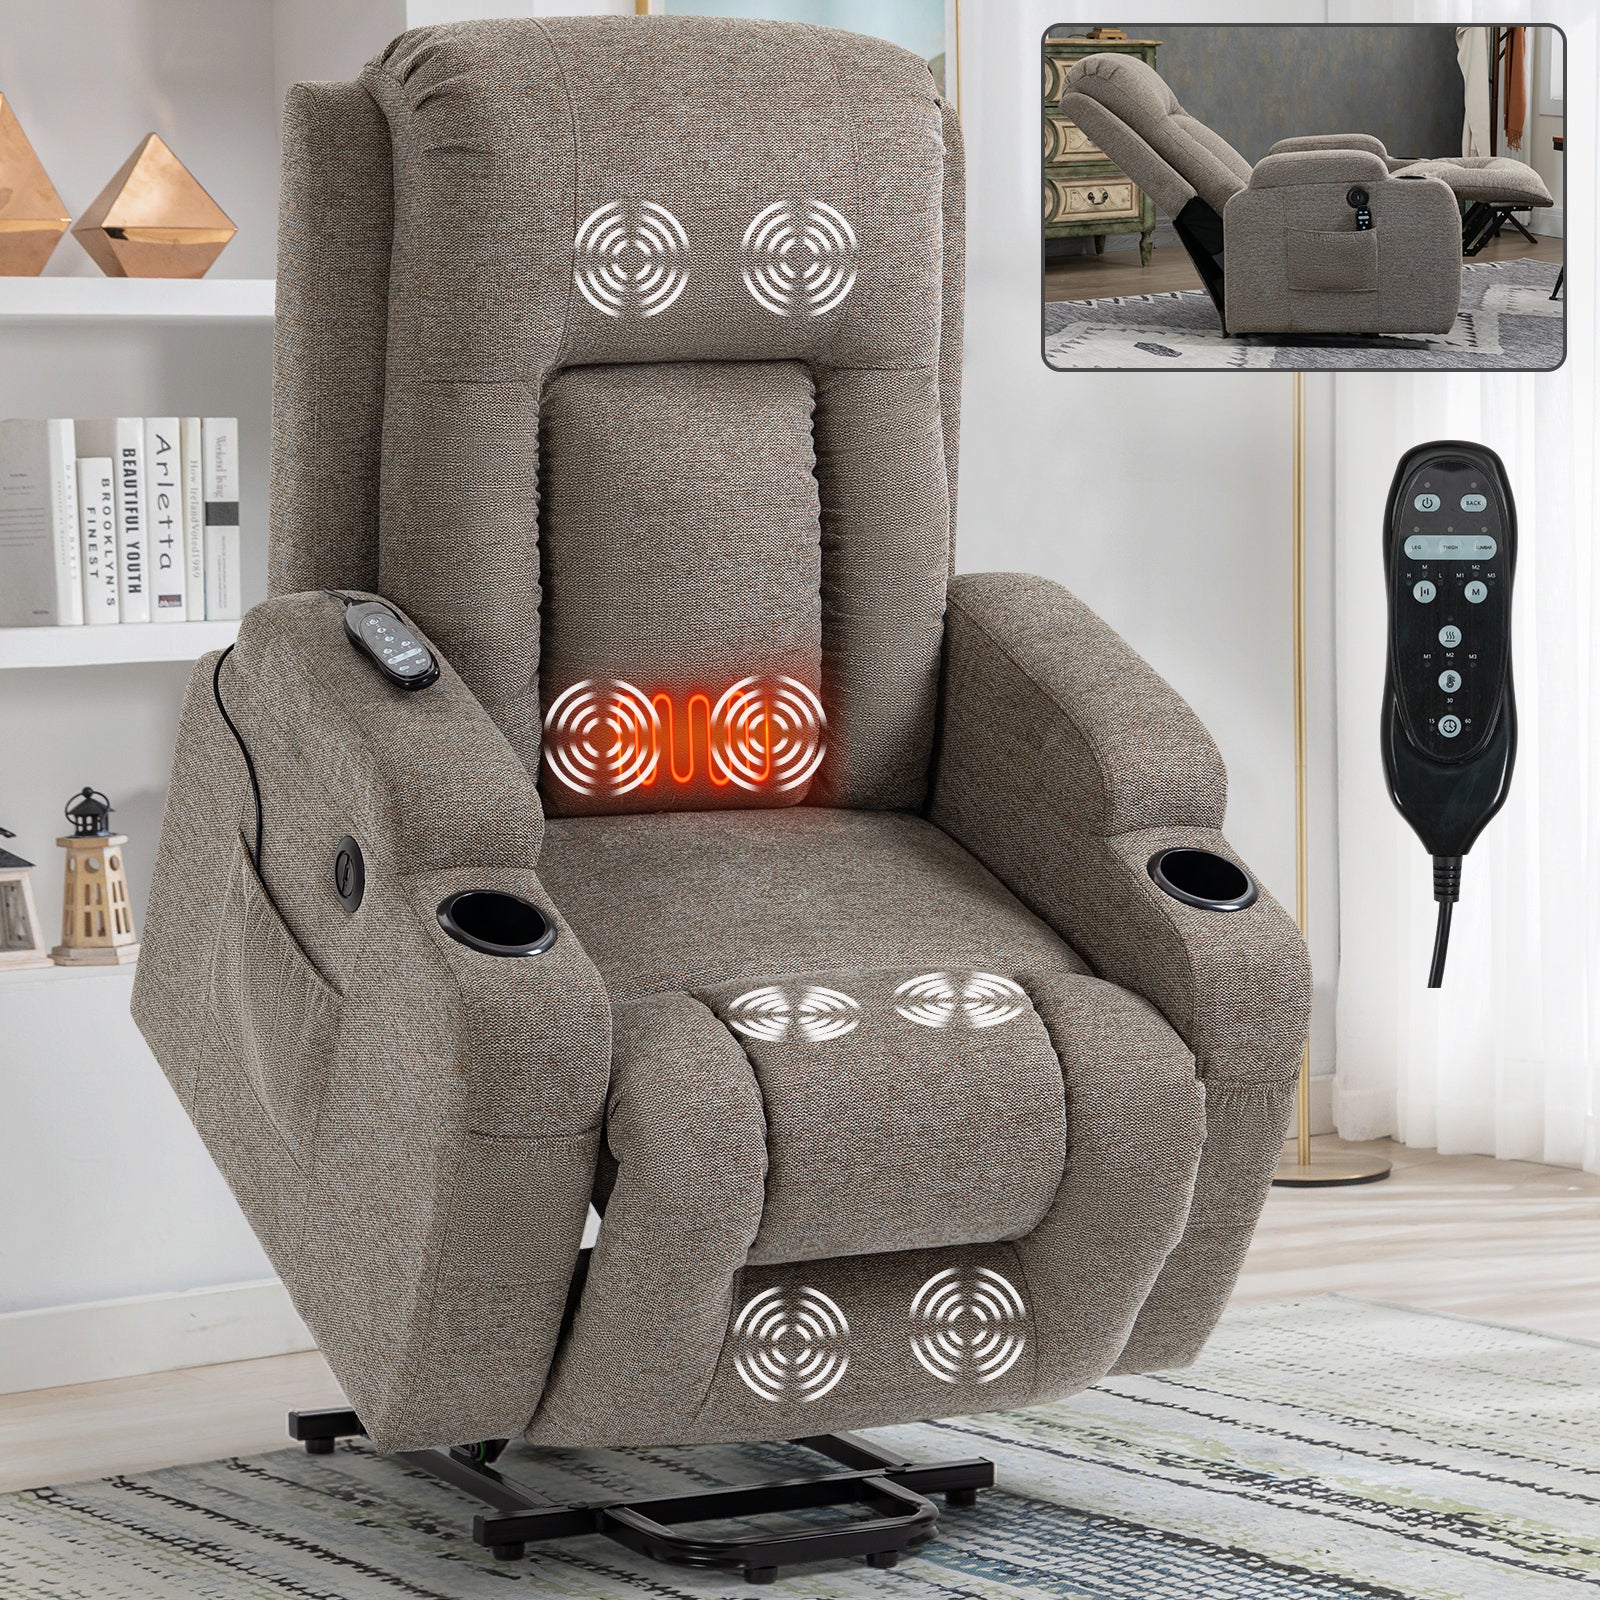 🆓🚛 Infinite Position Okin Motor Up To 350 Lbs Power Lift Recliner Chair for Elderly, Heavy Duty Motion Mechanism, 8-Point Vibration Massage and Lumbar Heating, USB Charging Port, Cup Holders, Brown